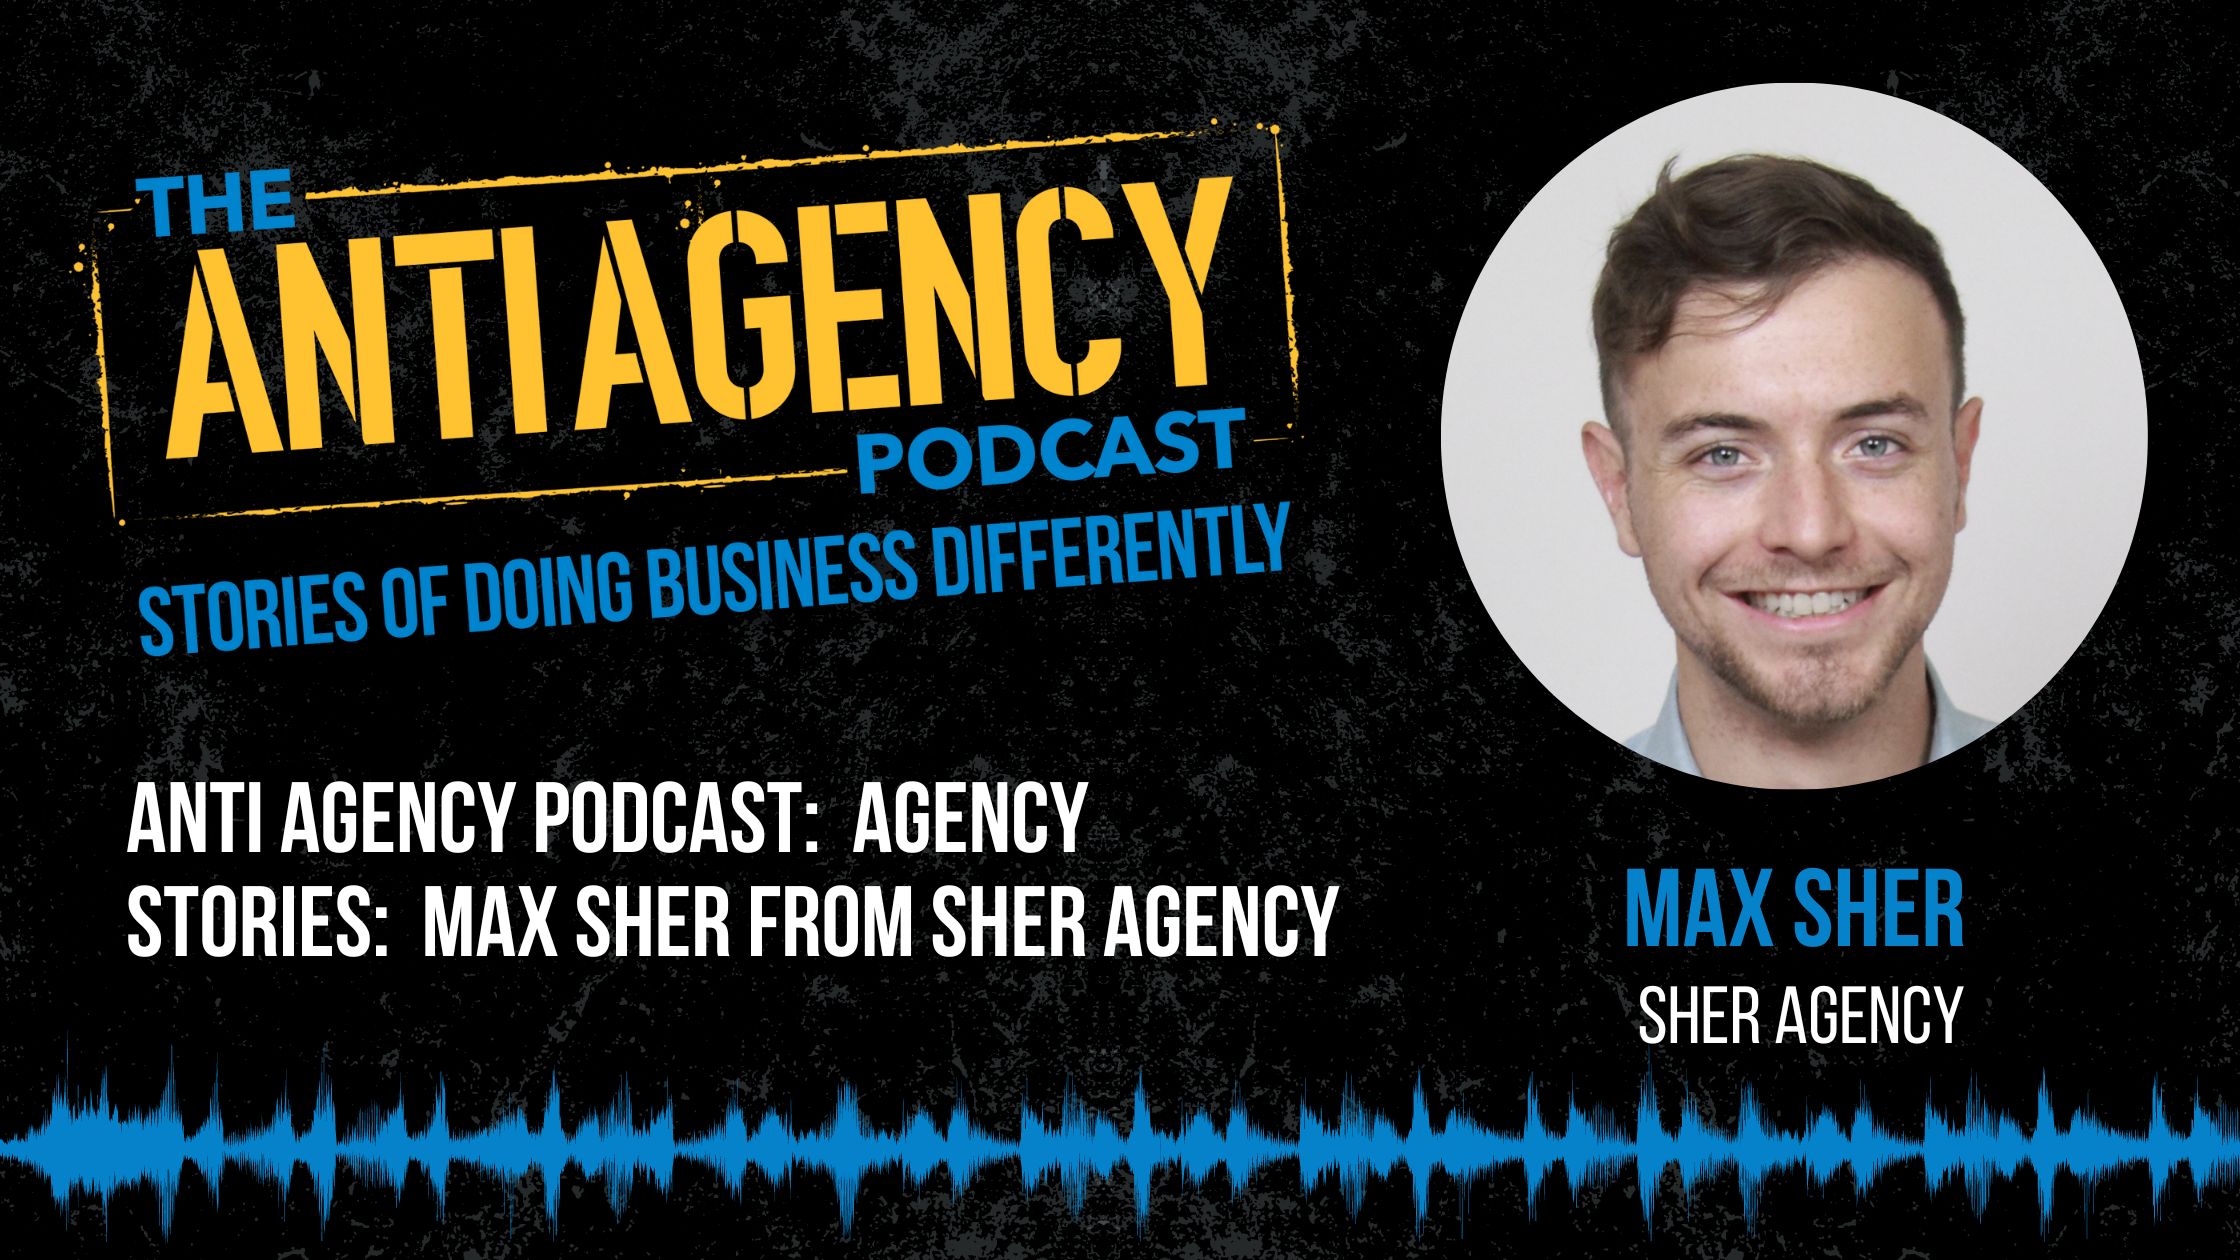 Anti Agency Podcast: Agency Stories: Max Sher from Sher Agency